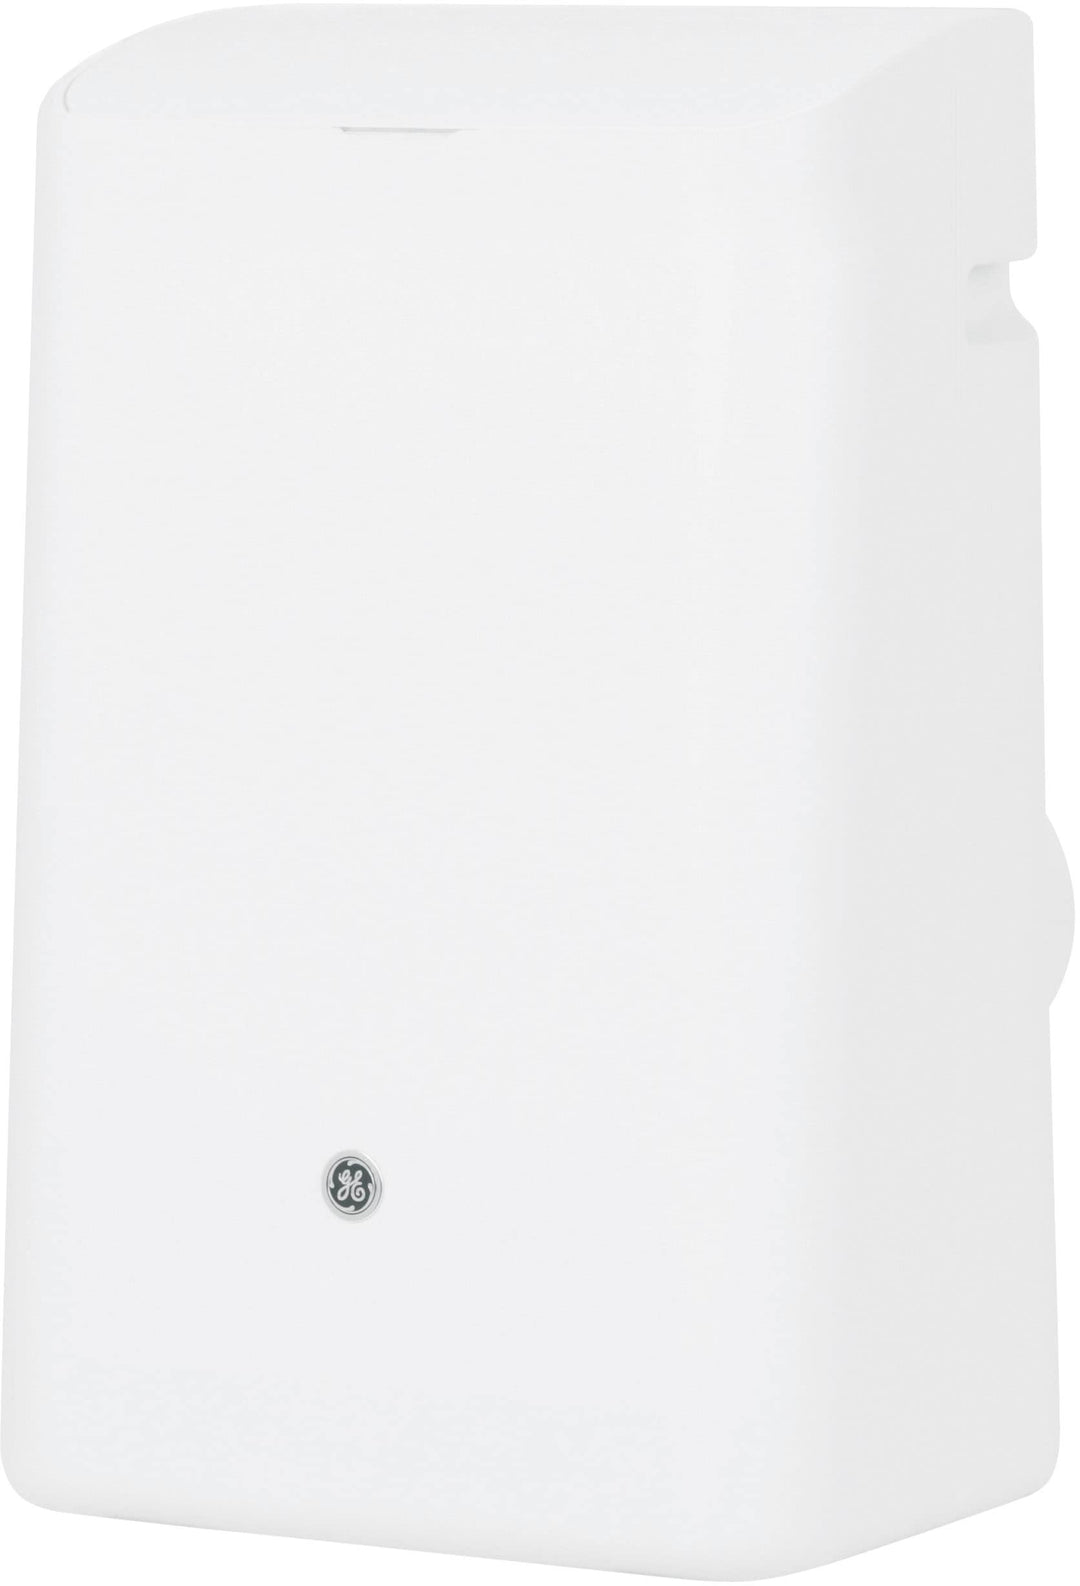 GE - 350 Sq. Ft. 10,000 BTU Portable Air Conditioner with Remote - White_0